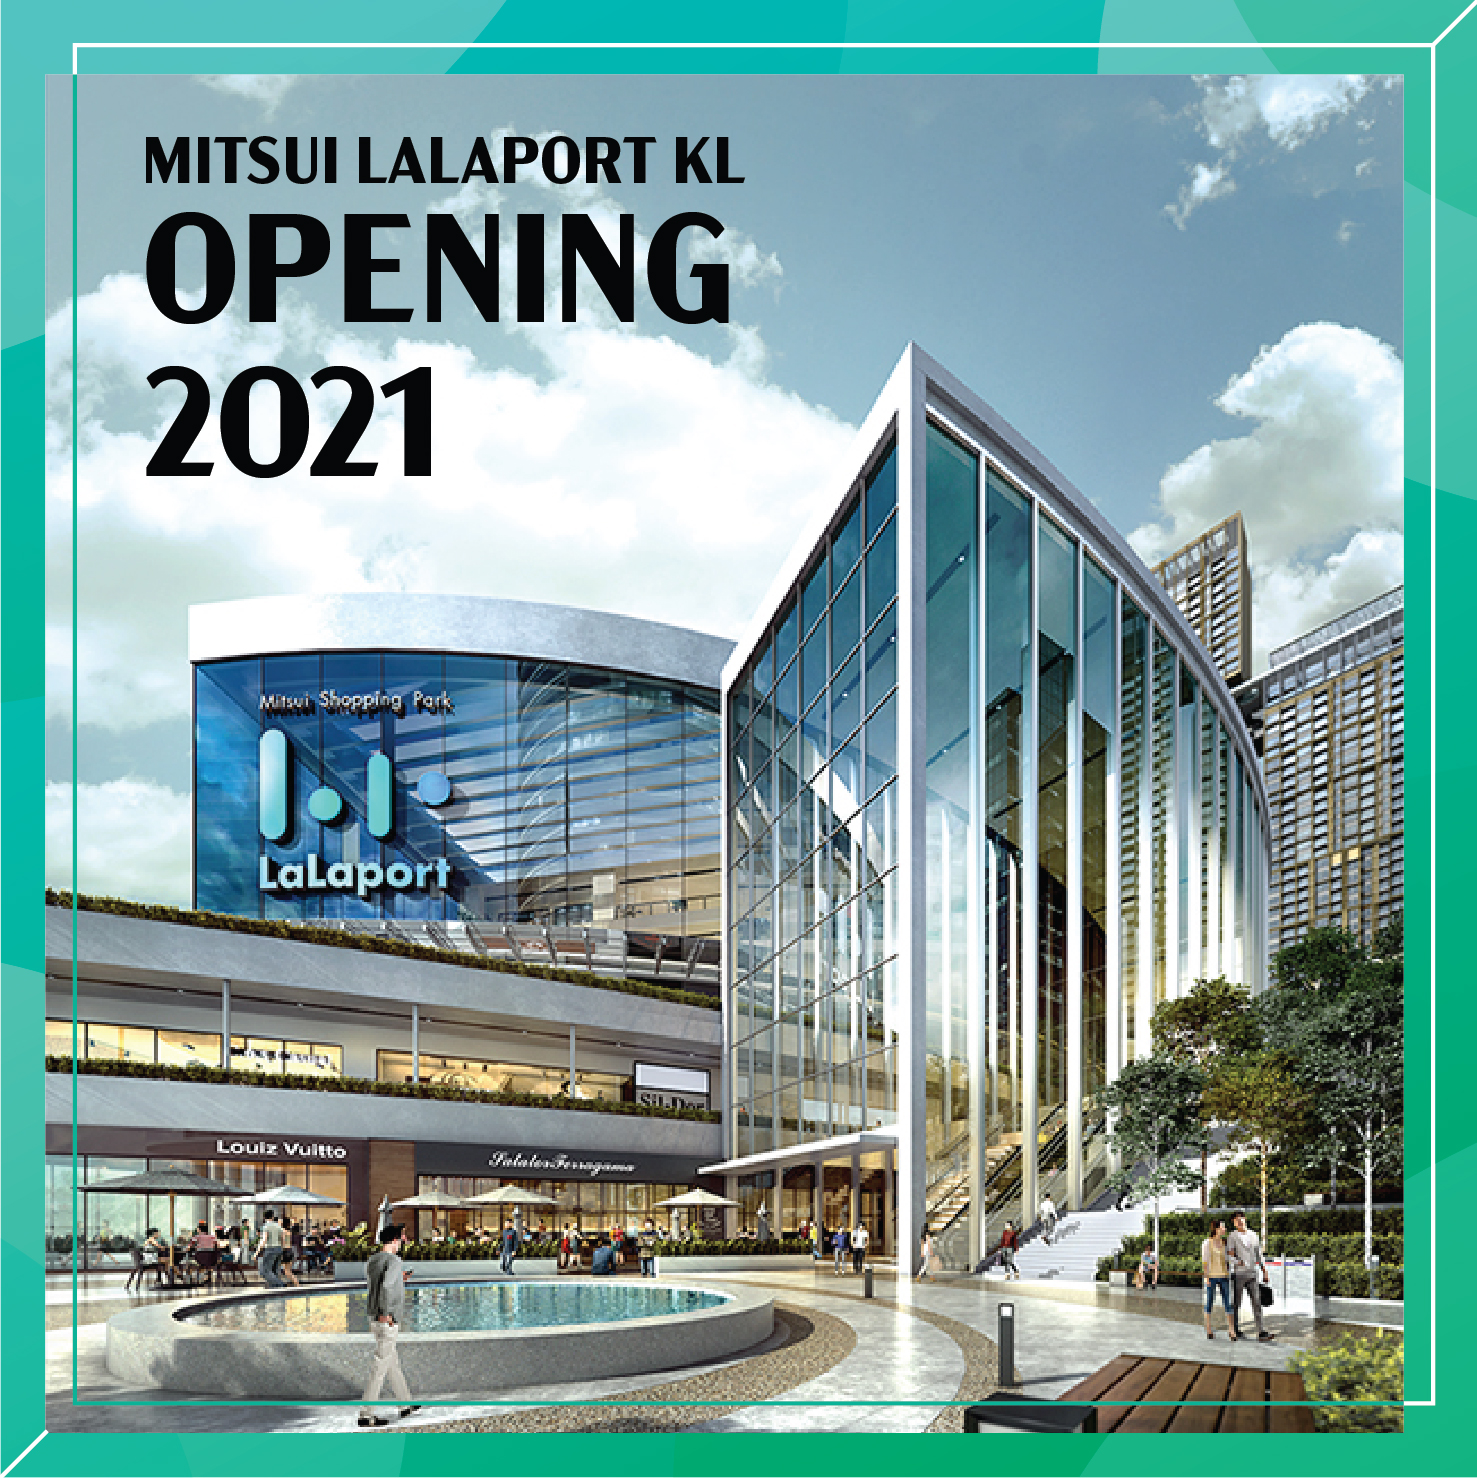 Lalaport kl opening